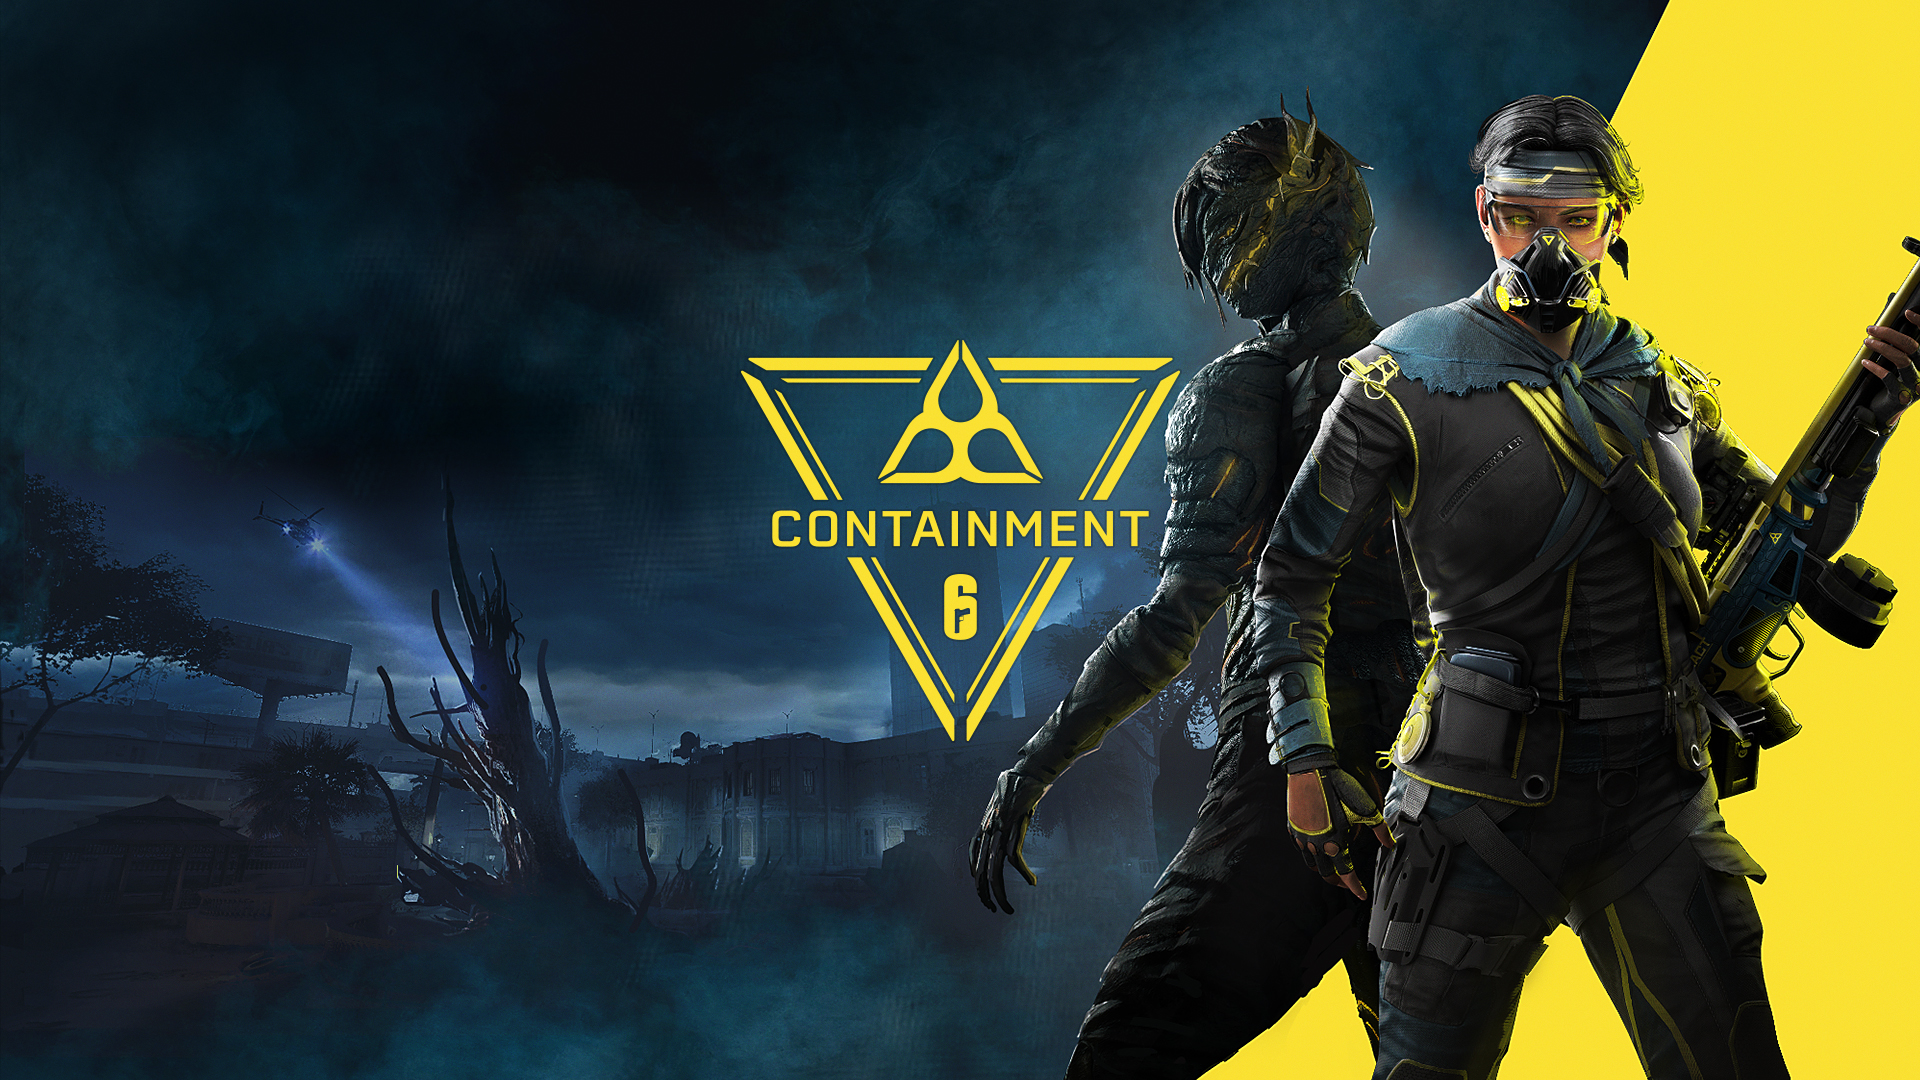 Rainbow Six Siege Gets Rainbow Six Extraction Themed Containment Event